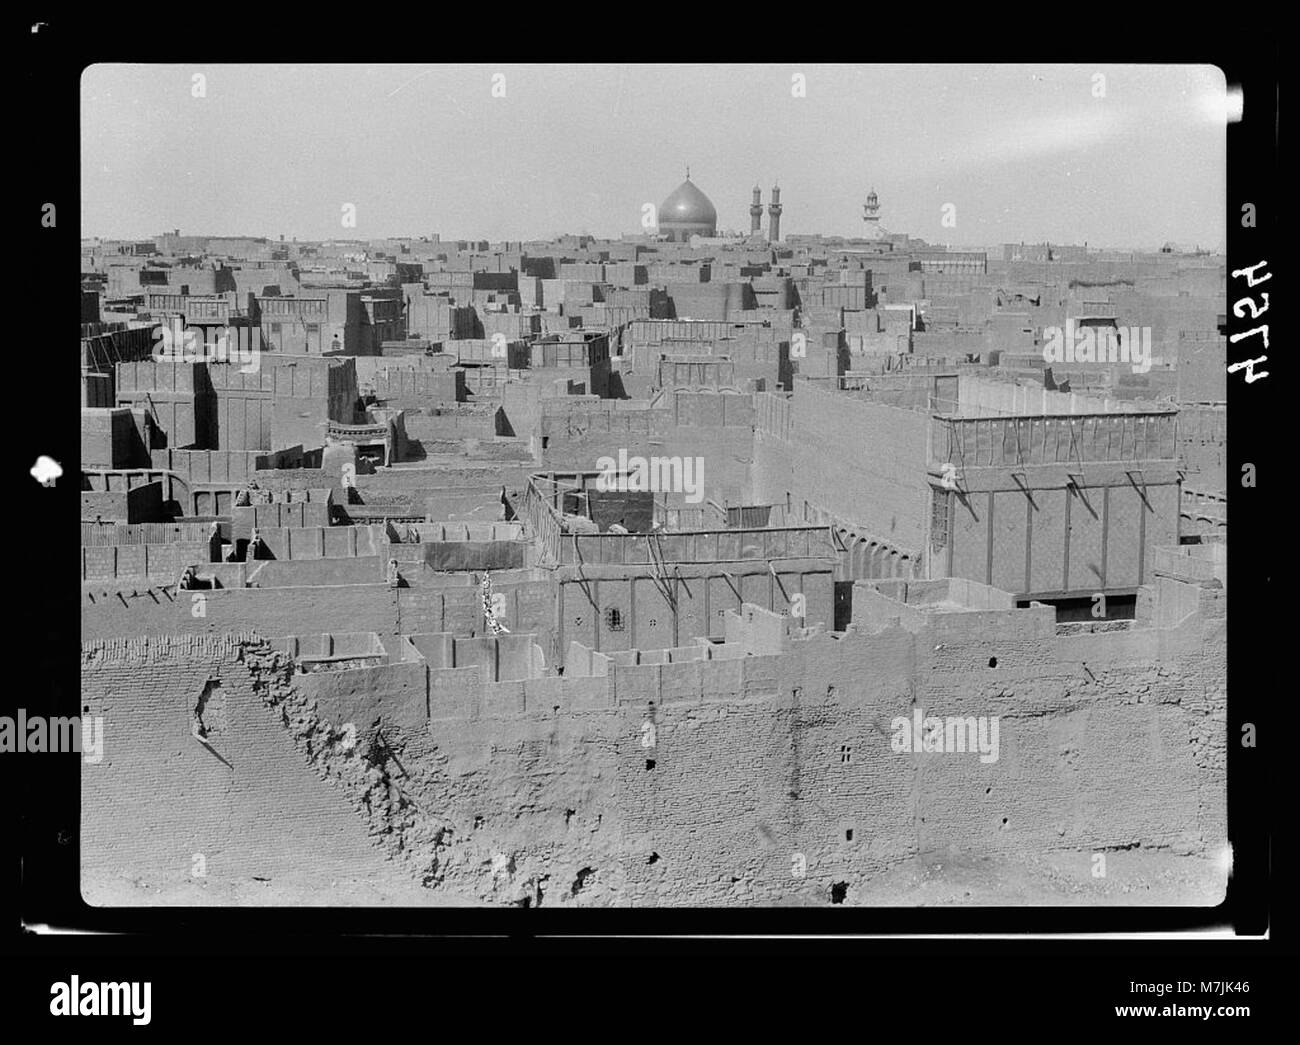 Iraq. Nejaf. First sacred city of the Shiite Moslems (i.e., Muslims). General view of the city showing the great mosque in distance LOC matpc.16155 Stock Photo